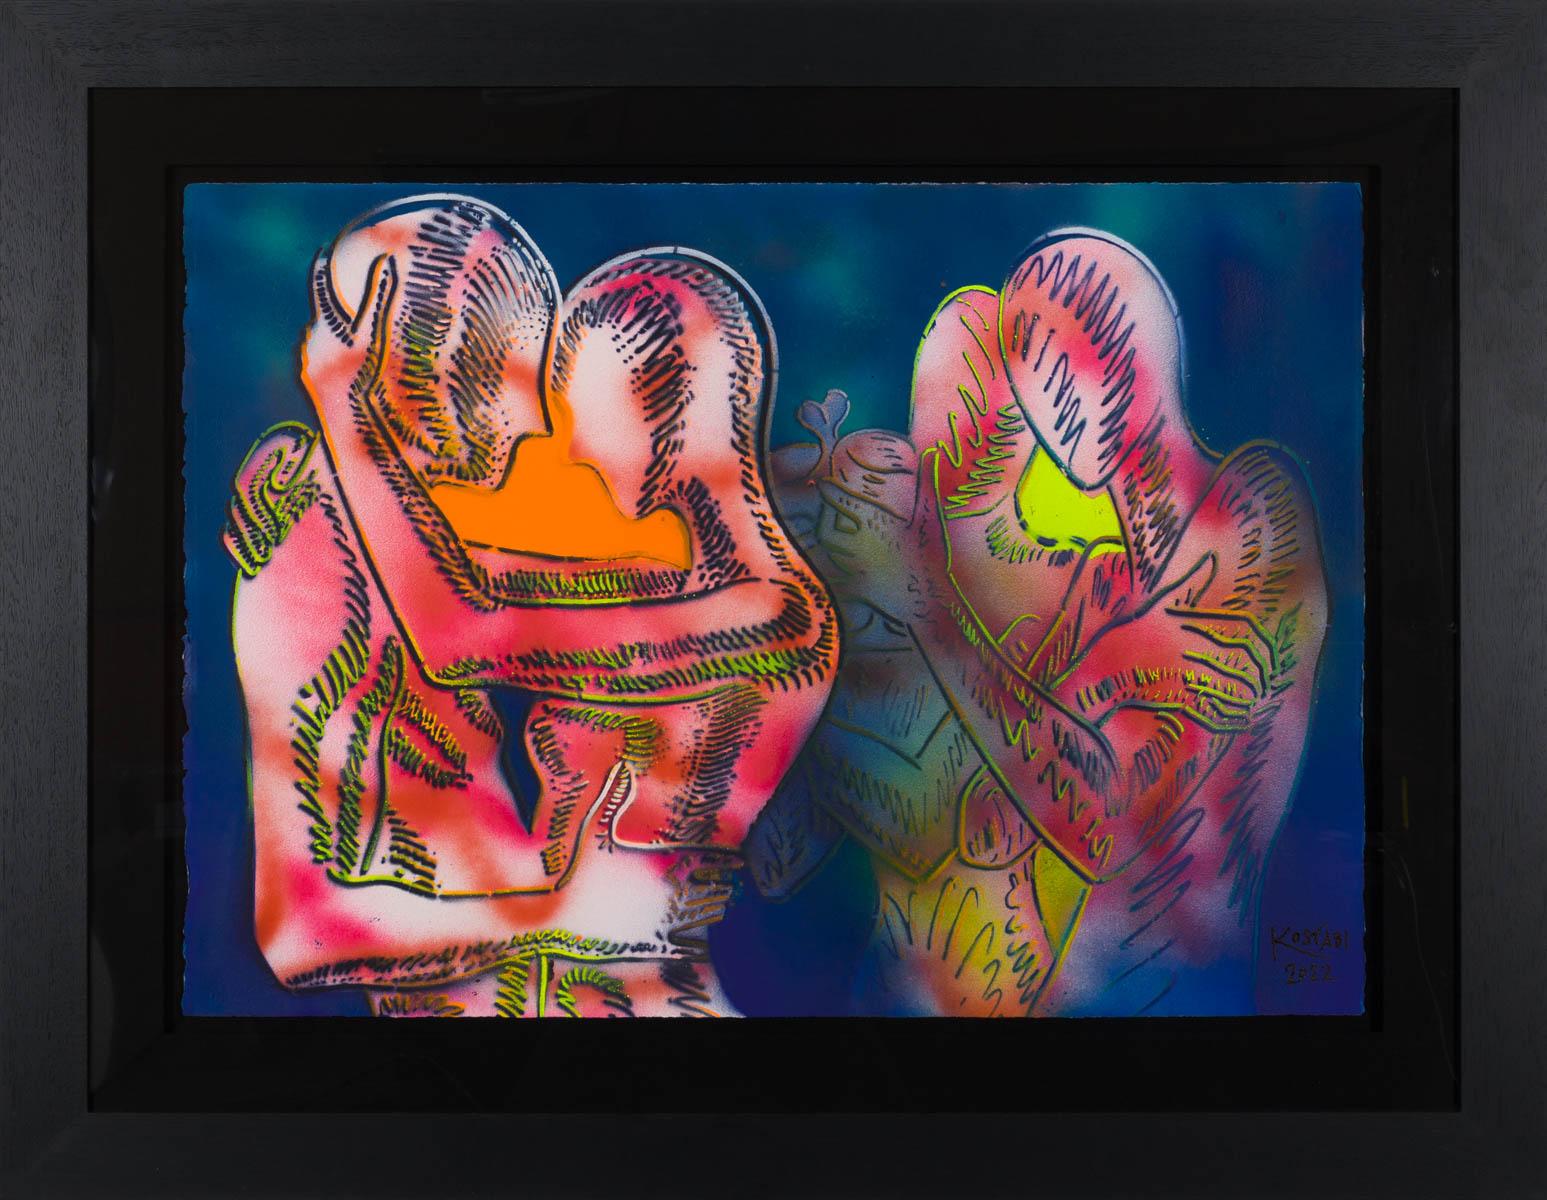 Until Then - Painting by Mark Kostabi